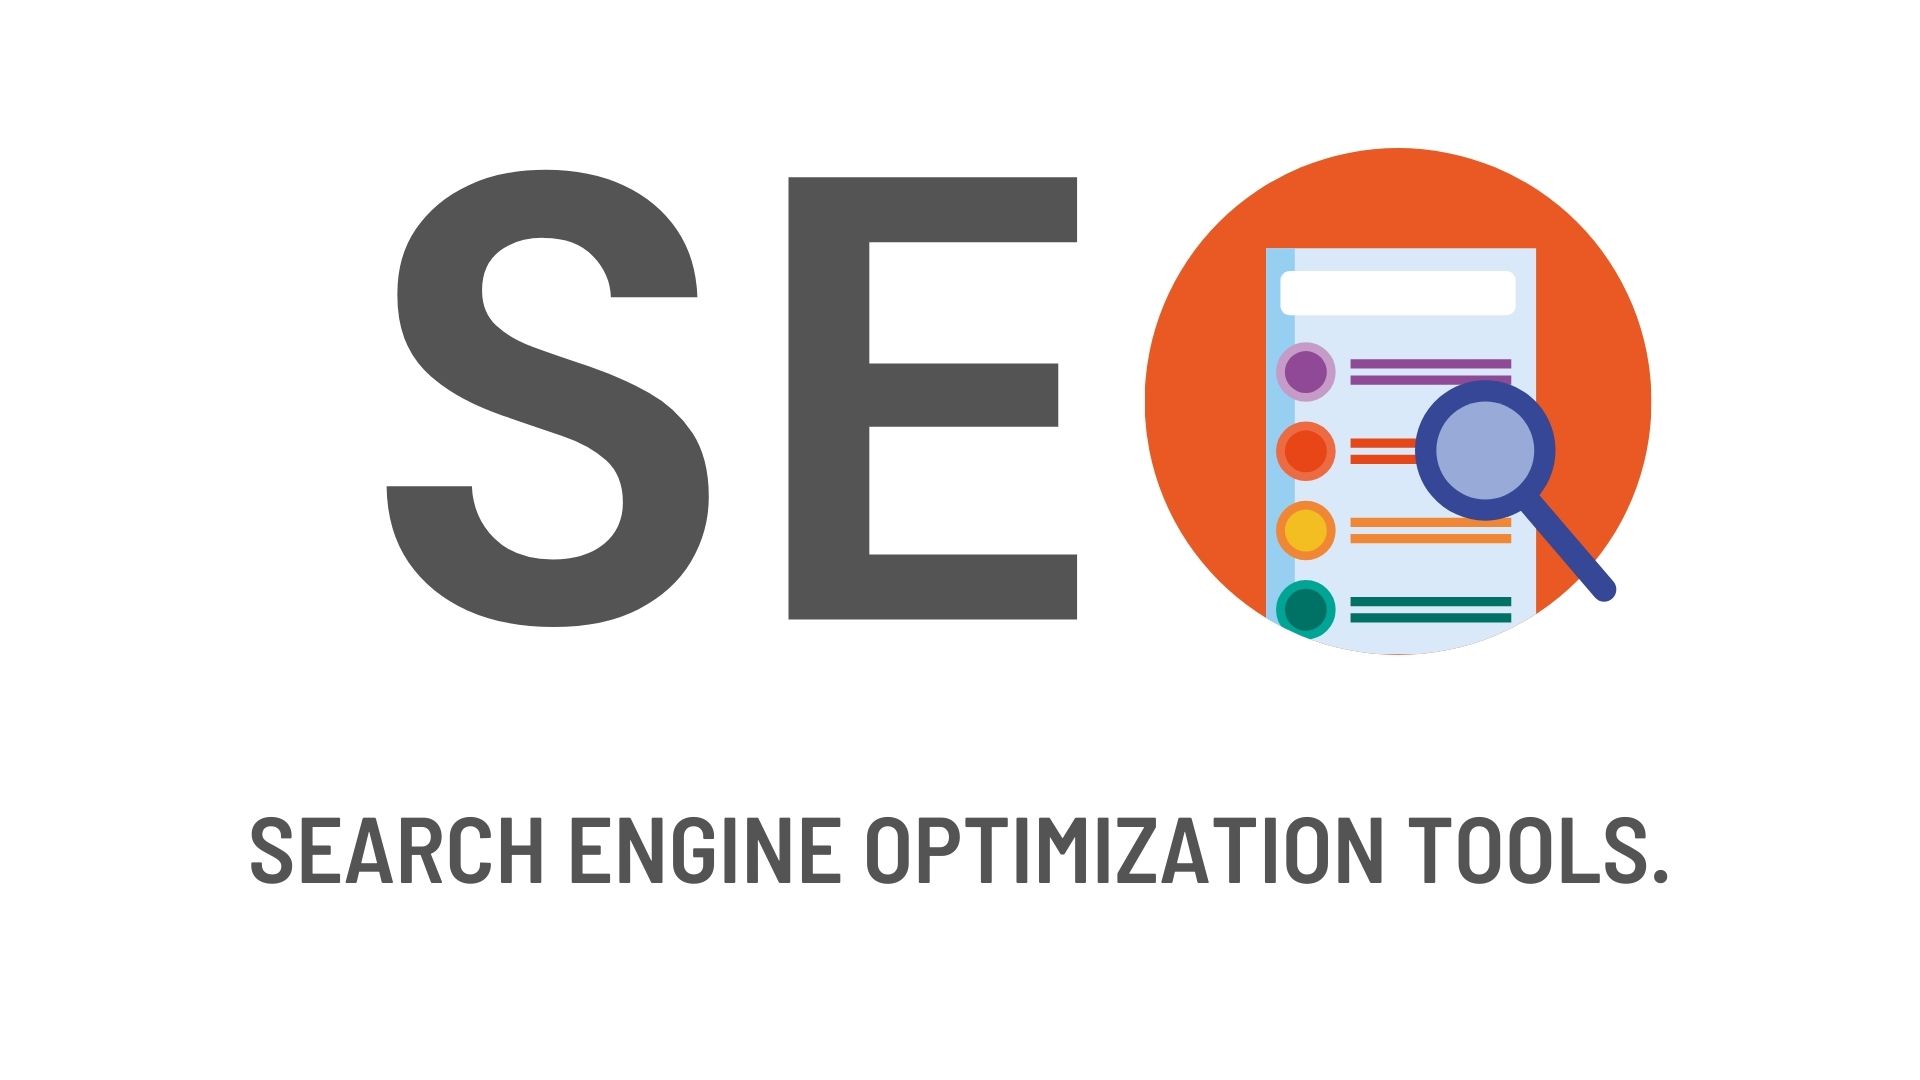 Tools for SEO (Search Engine Optimization)